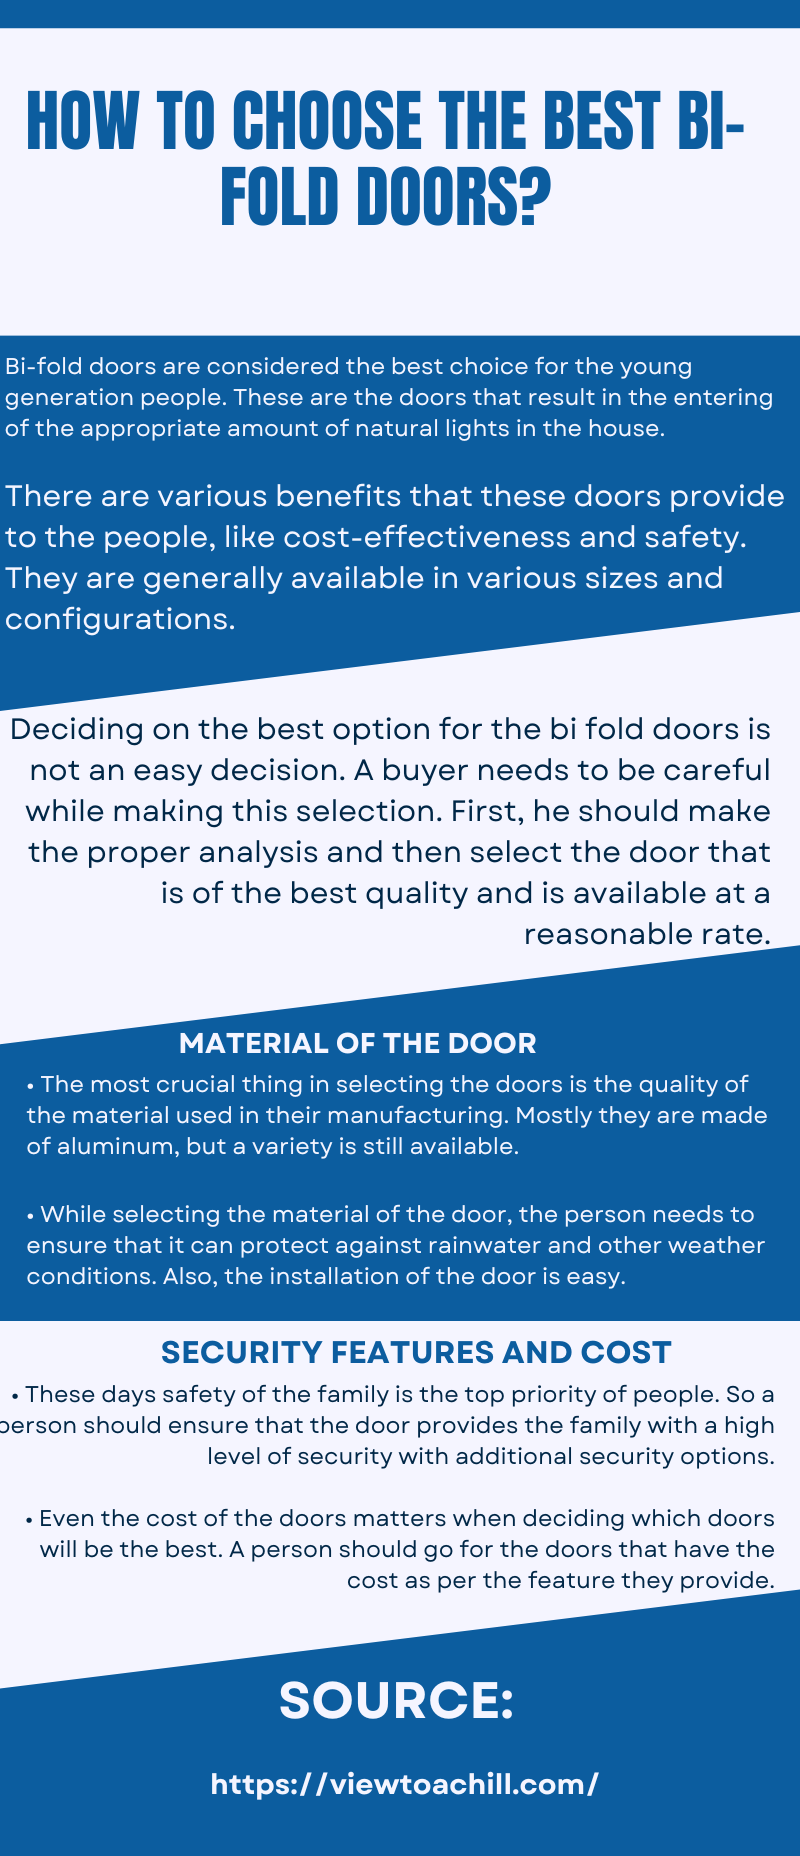 Know Everything about the Bi-Fold Doors